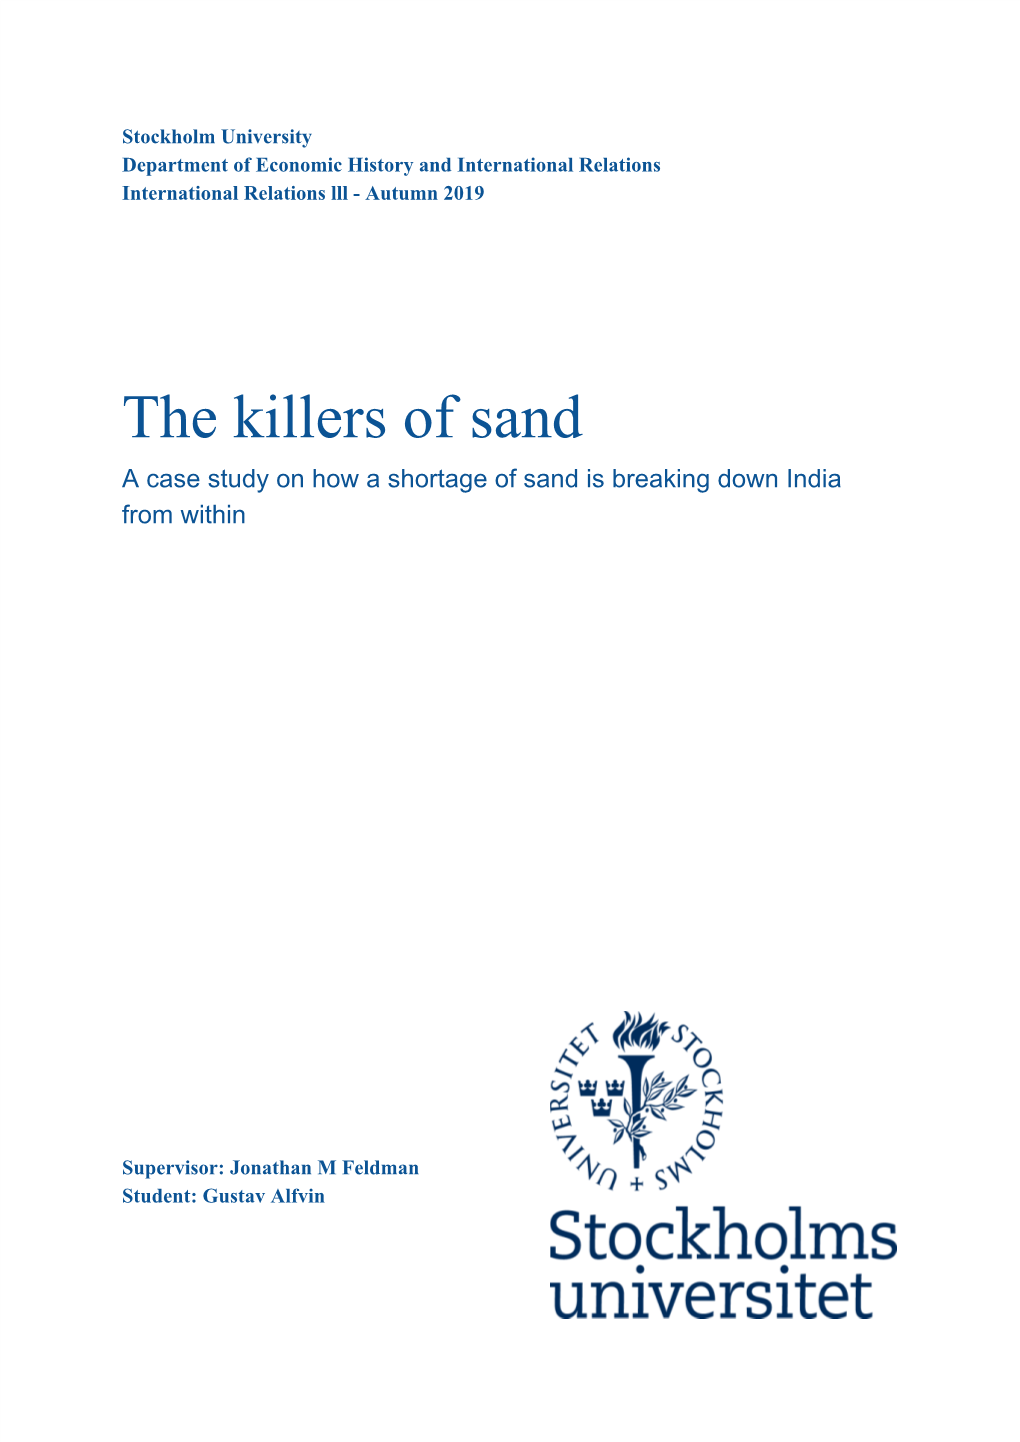 The Killers of Sand a Case Study on How a Shortage of Sand Is Breaking Down India from Within